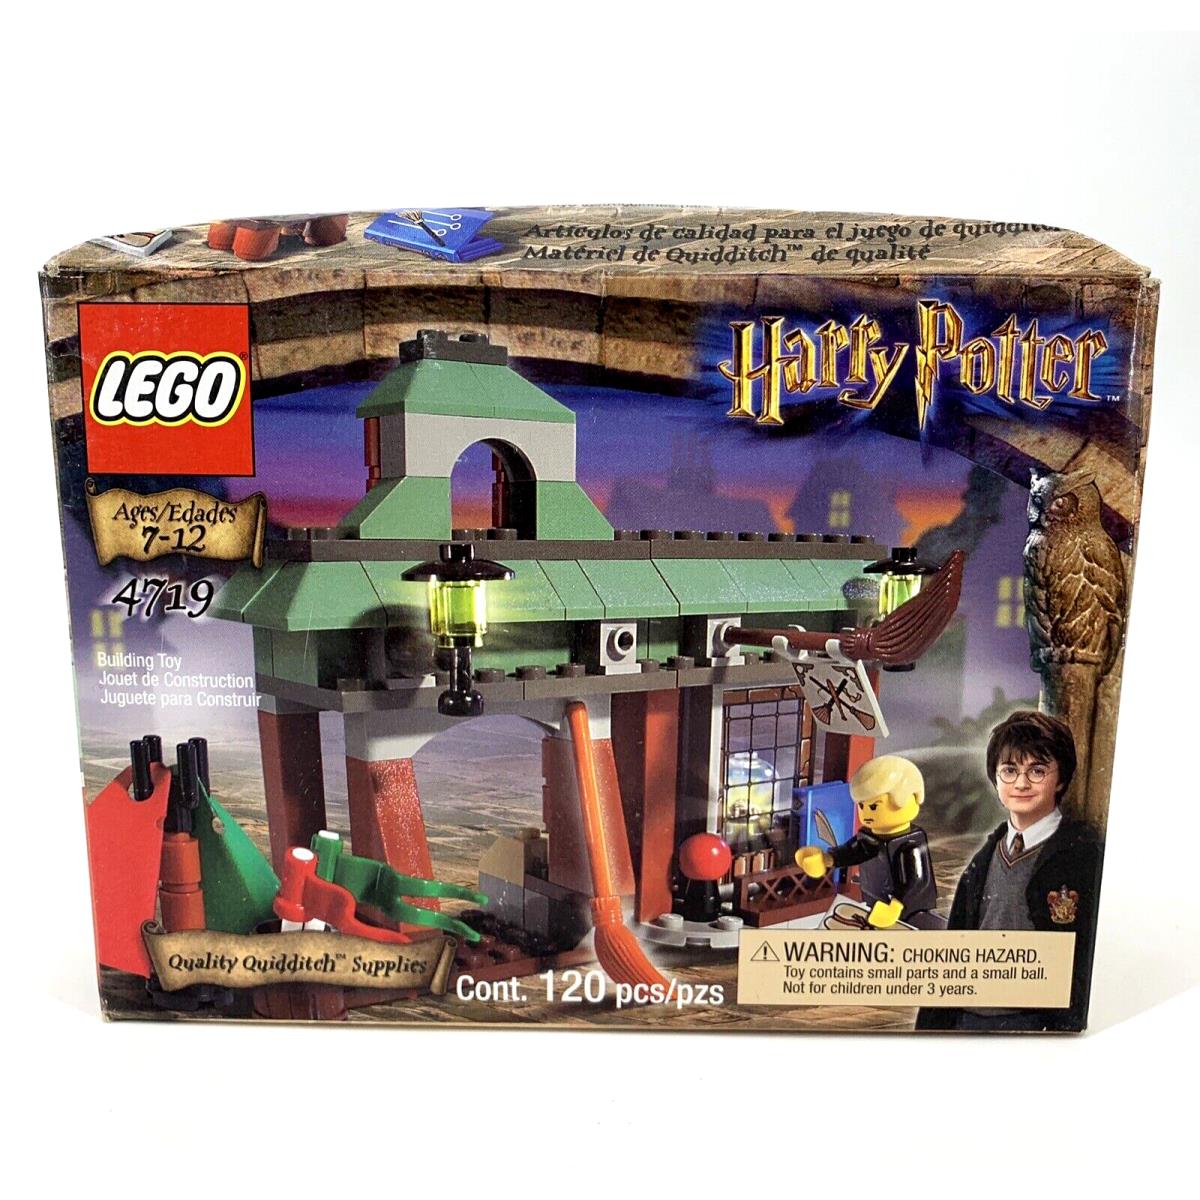 Lego 4719 Harry Potter Quality Quidditch Supplies Retired